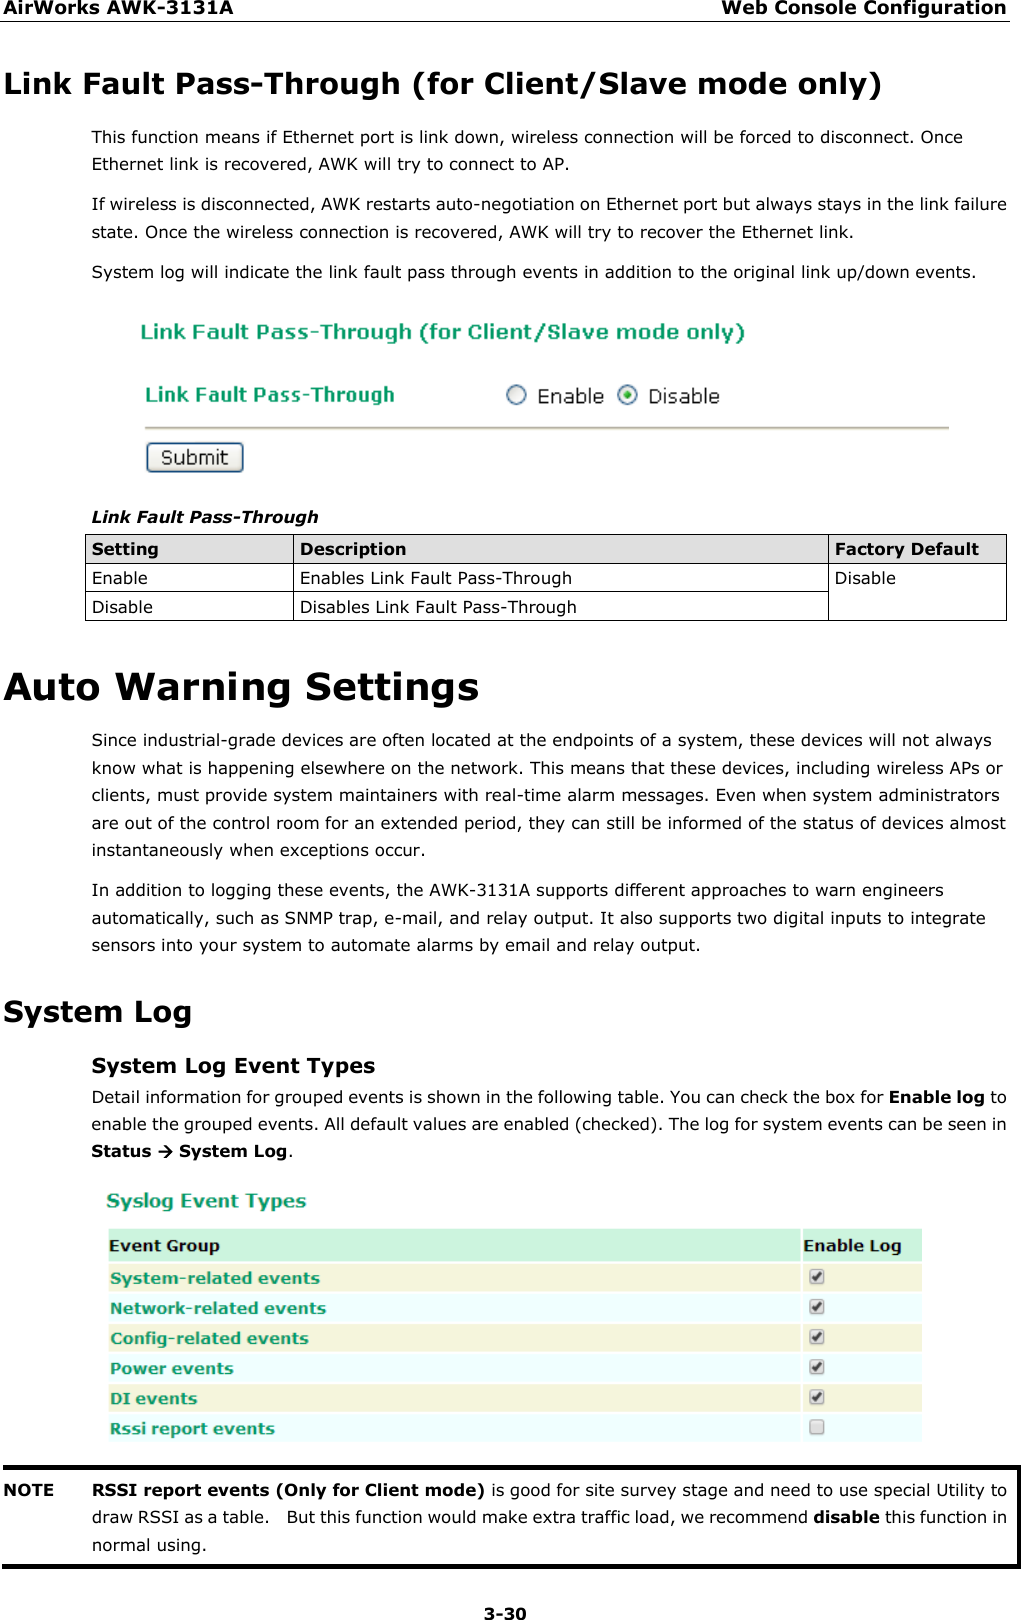 AirWorks AWK-3131A Web Console Configuration  3-30 Link Fault Pass-Through (for Client/Slave mode only) This function means if Ethernet port is link down, wireless connection will be forced to disconnect. Once Ethernet link is recovered, AWK will try to connect to AP. If wireless is disconnected, AWK restarts auto-negotiation on Ethernet port but always stays in the link failure state. Once the wireless connection is recovered, AWK will try to recover the Ethernet link. System log will indicate the link fault pass through events in addition to the original link up/down events.  Link Fault Pass-Through Setting Description Factory Default Enable Enables Link Fault Pass-Through Disable Disable Disables Link Fault Pass-Through Auto Warning Settings Since industrial-grade devices are often located at the endpoints of a system, these devices will not always know what is happening elsewhere on the network. This means that these devices, including wireless APs or clients, must provide system maintainers with real-time alarm messages. Even when system administrators are out of the control room for an extended period, they can still be informed of the status of devices almost instantaneously when exceptions occur. In addition to logging these events, the AWK-3131A supports different approaches to warn engineers automatically, such as SNMP trap, e-mail, and relay output. It also supports two digital inputs to integrate sensors into your system to automate alarms by email and relay output. System Log System Log Event Types Detail information for grouped events is shown in the following table. You can check the box for Enable log to enable the grouped events. All default values are enabled (checked). The log for system events can be seen in Status  System Log.  NOTE RSSI report events (Only for Client mode) is good for site survey stage and need to use special Utility to draw RSSI as a table.    But this function would make extra traffic load, we recommend disable this function in normal using.  